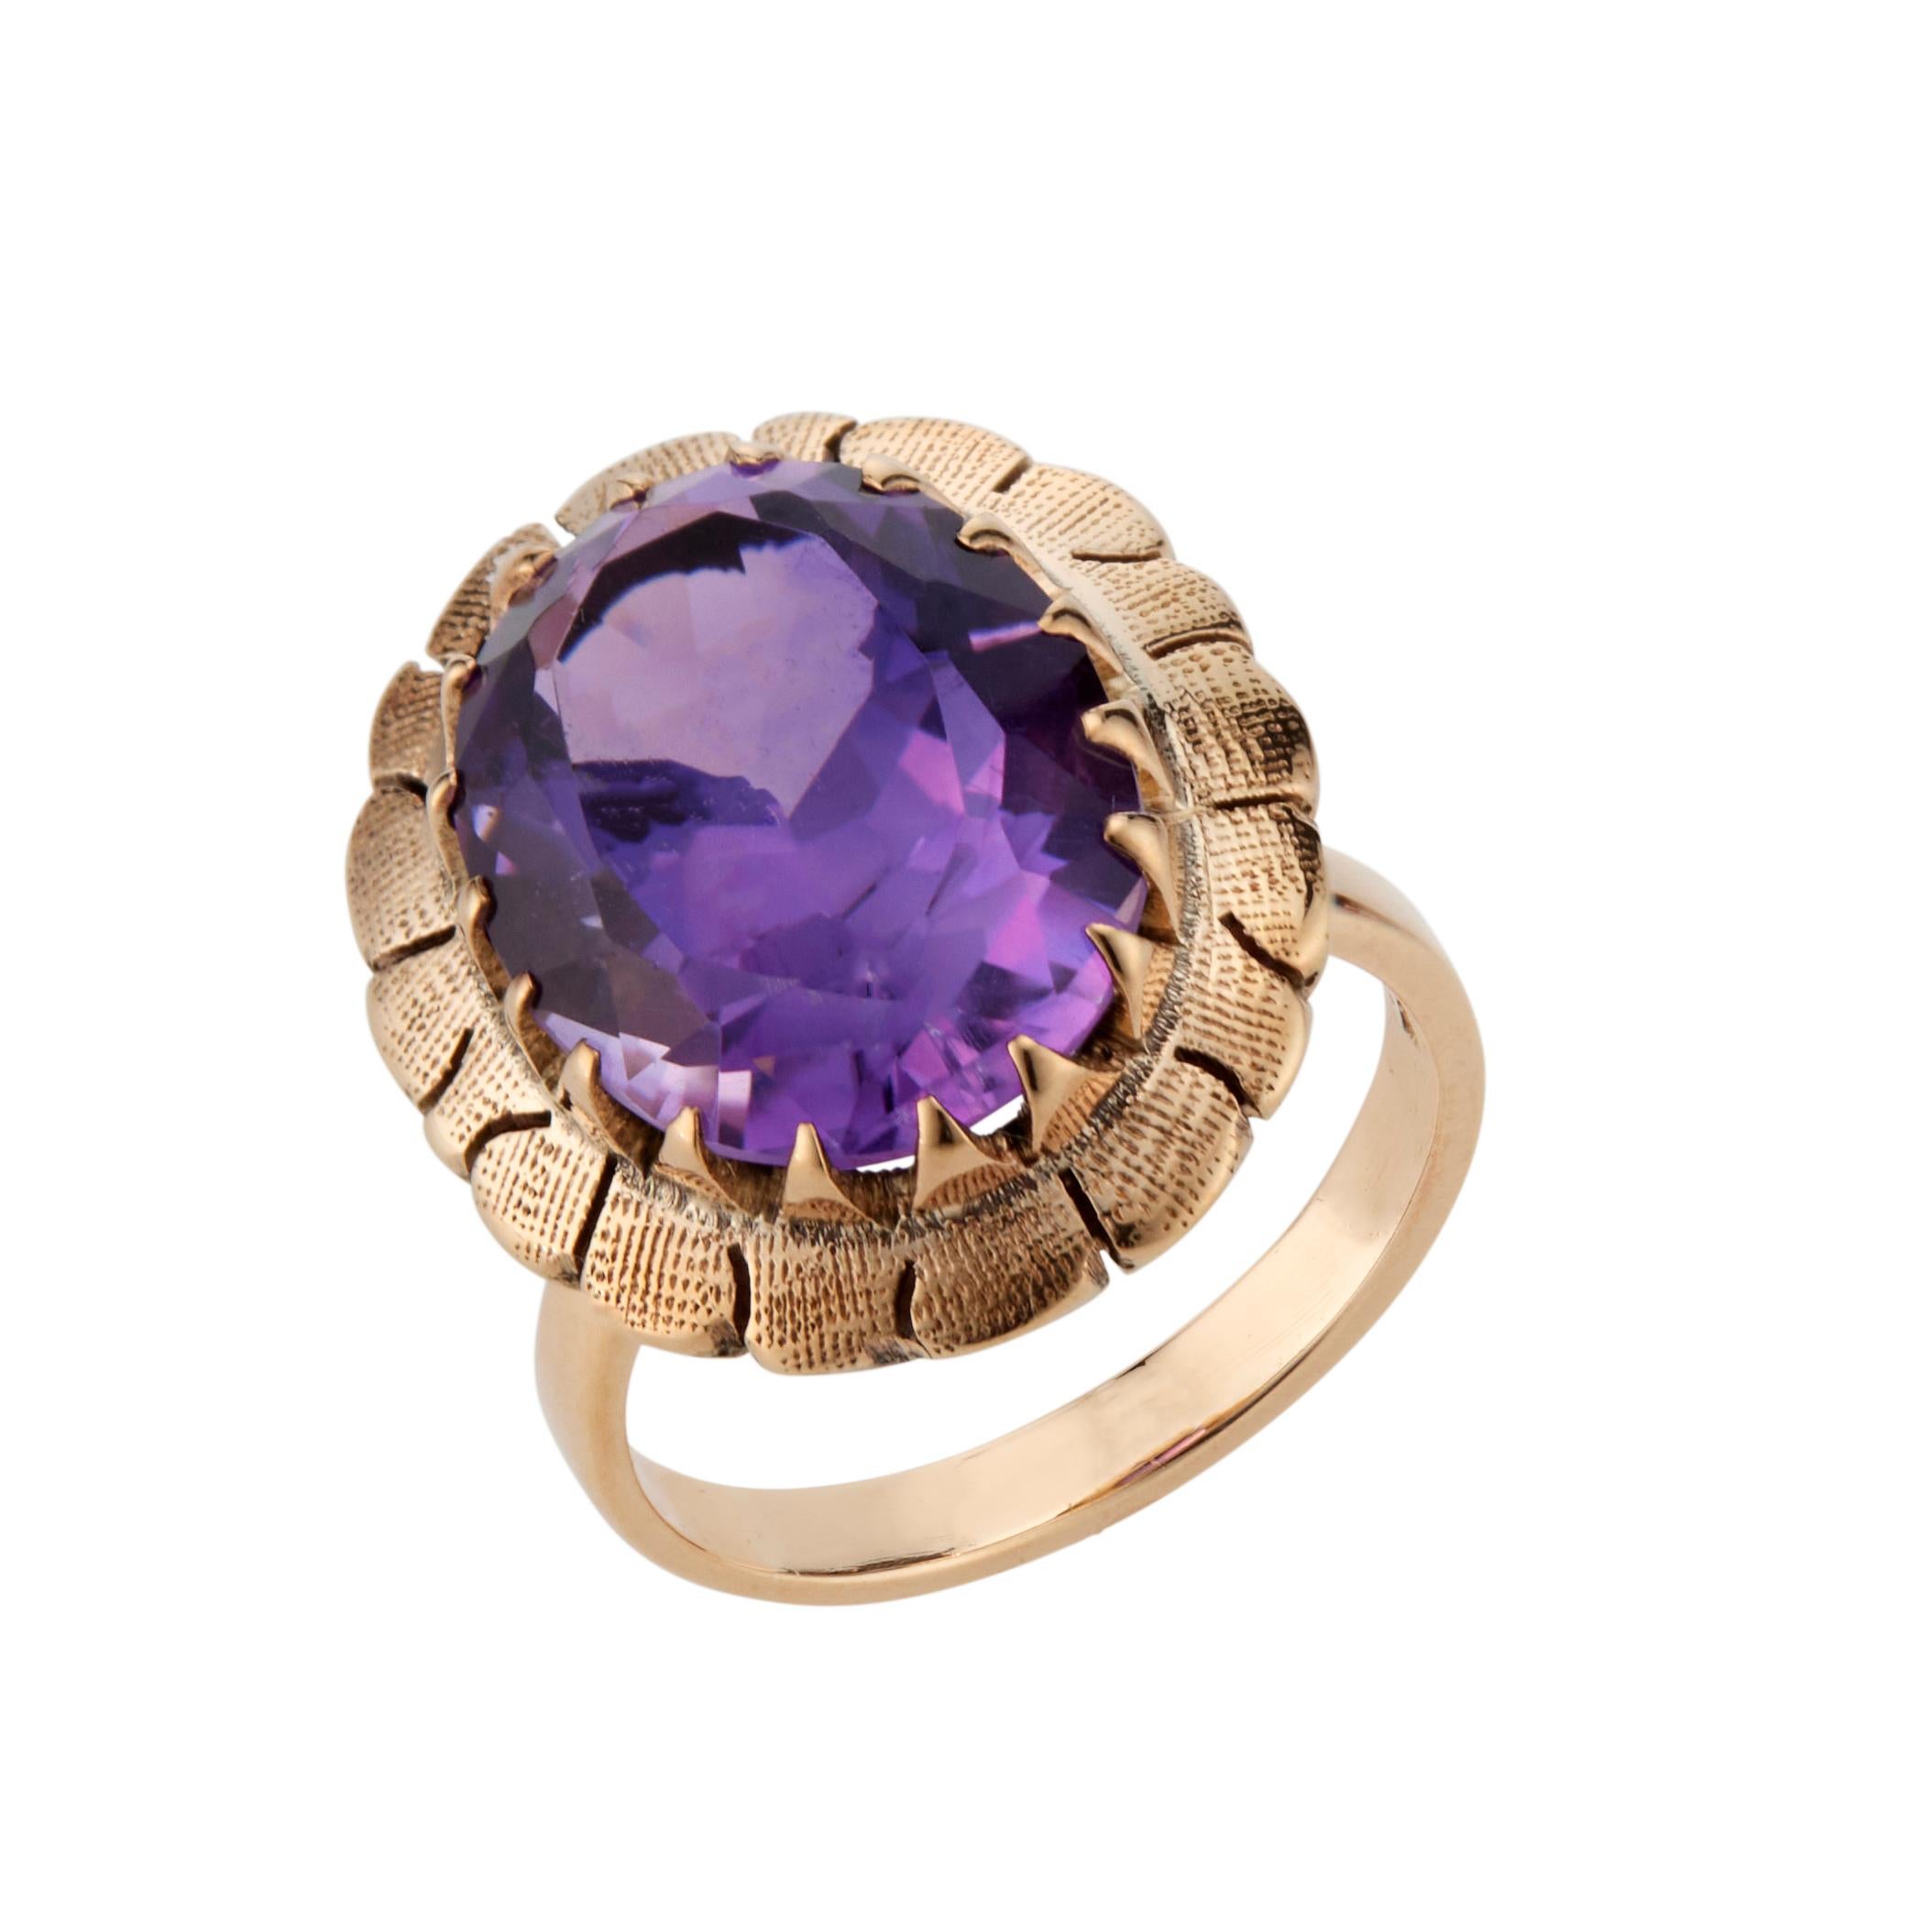 Art Deco 1930's Amethyst ring. 5.50 carat Oval center Amethyst in a 14k handmade rose gold setting.  

1 oval bright purple Amethyst, approx. total weight 5.50cts, 
Size 5 and sizable
14k rose gold
4.5 grams
Stamped: 14k
Tested: 14k
Width at top: